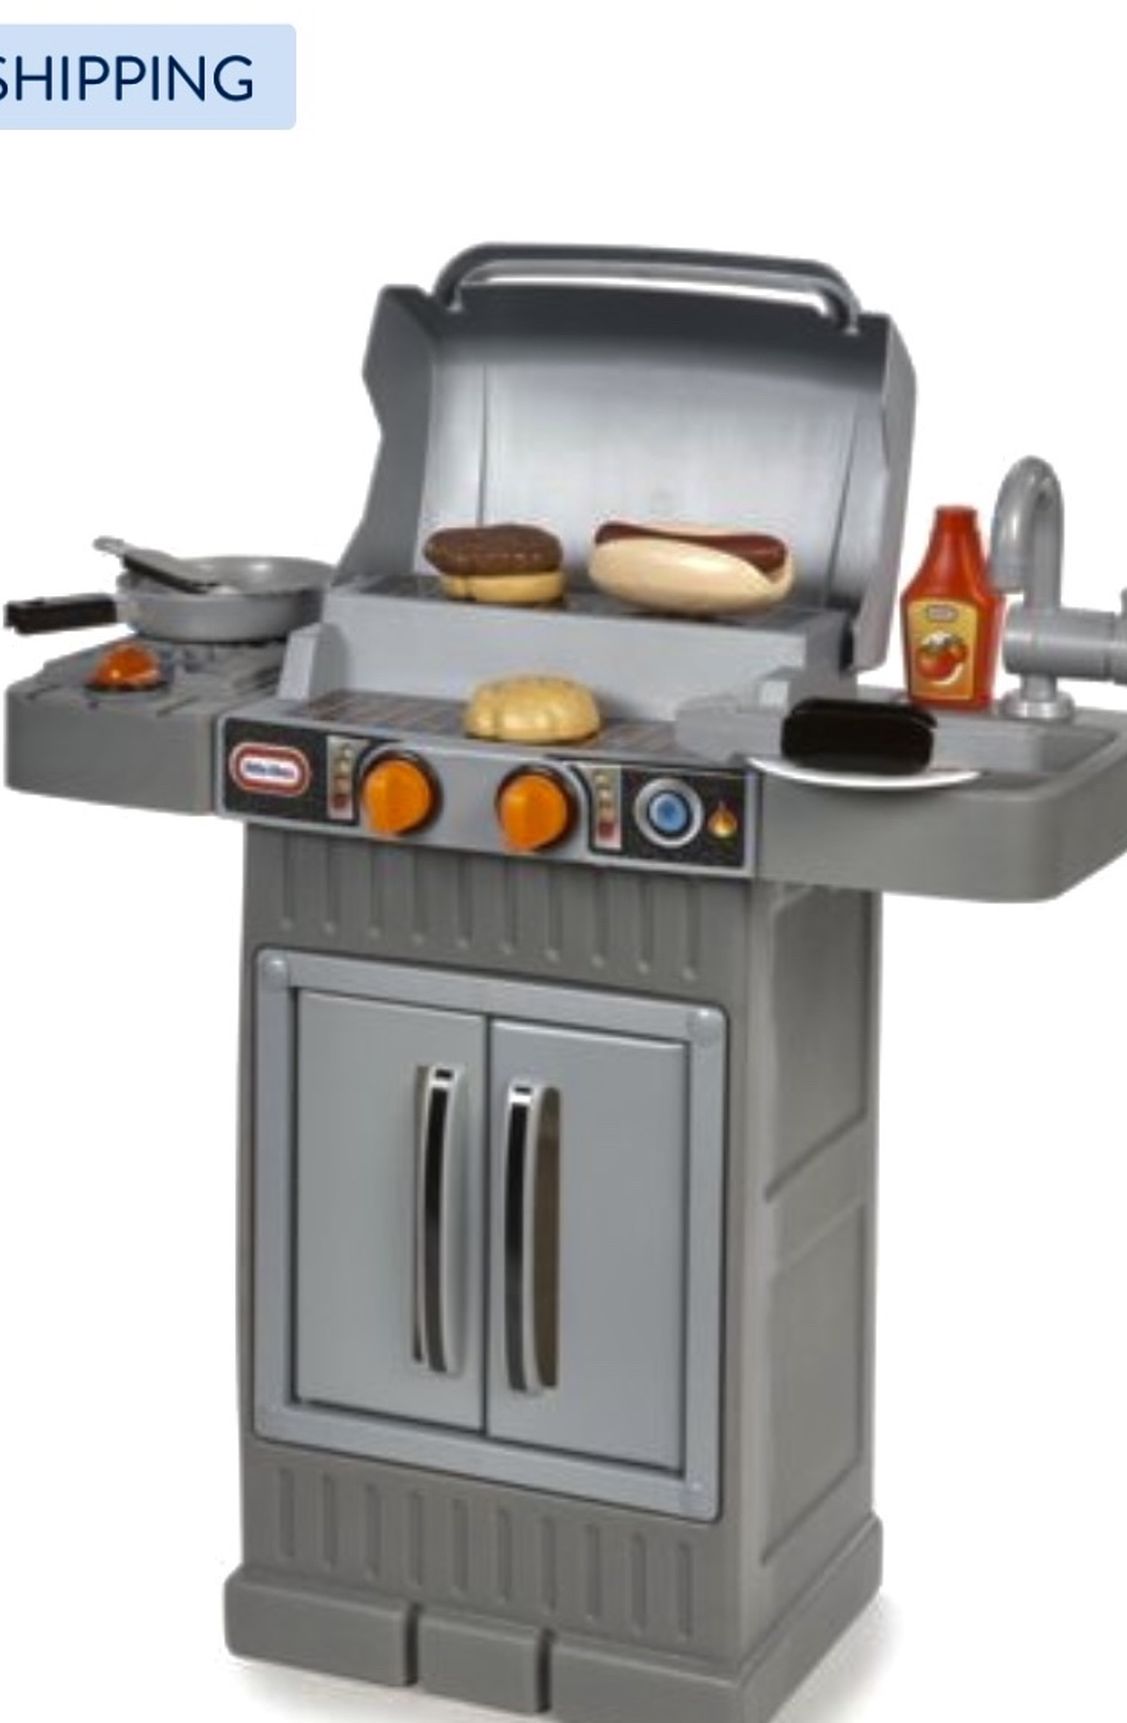 Little tykes barbecue grill